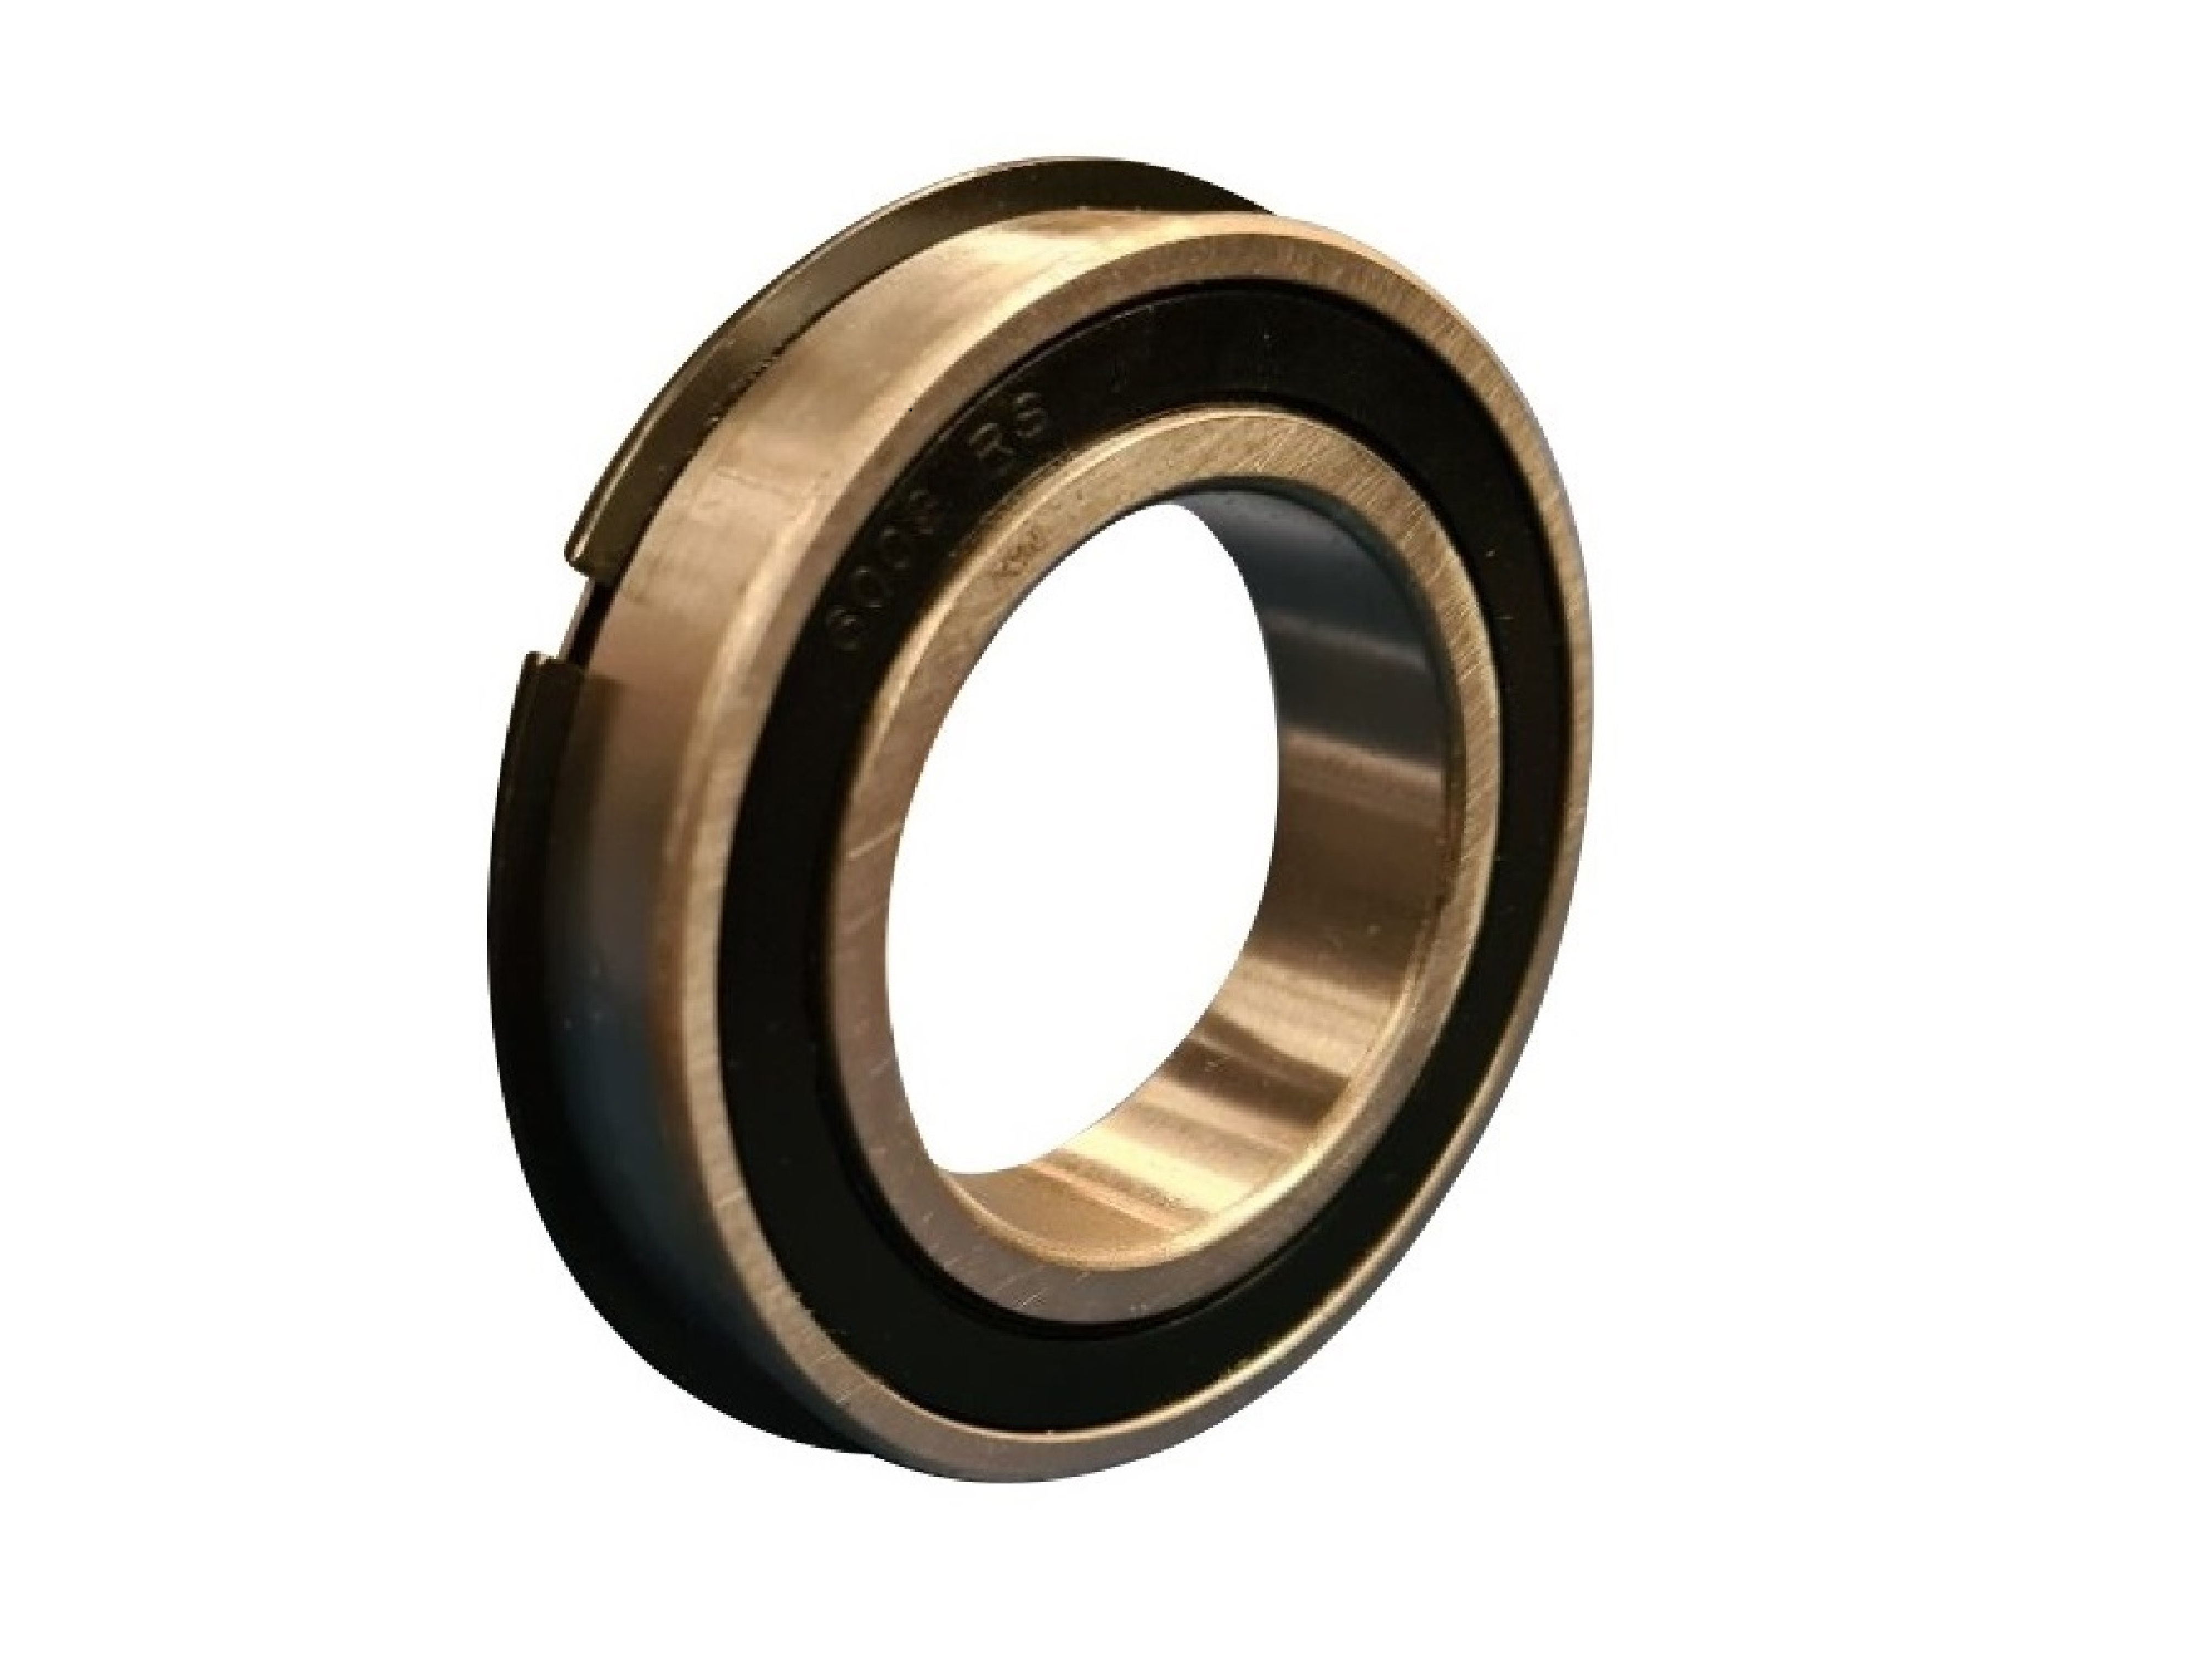 ZEN 6203-2RS-NR Sealed Ball Bearing With Snap Ring 17mm x 40mm x 12mm